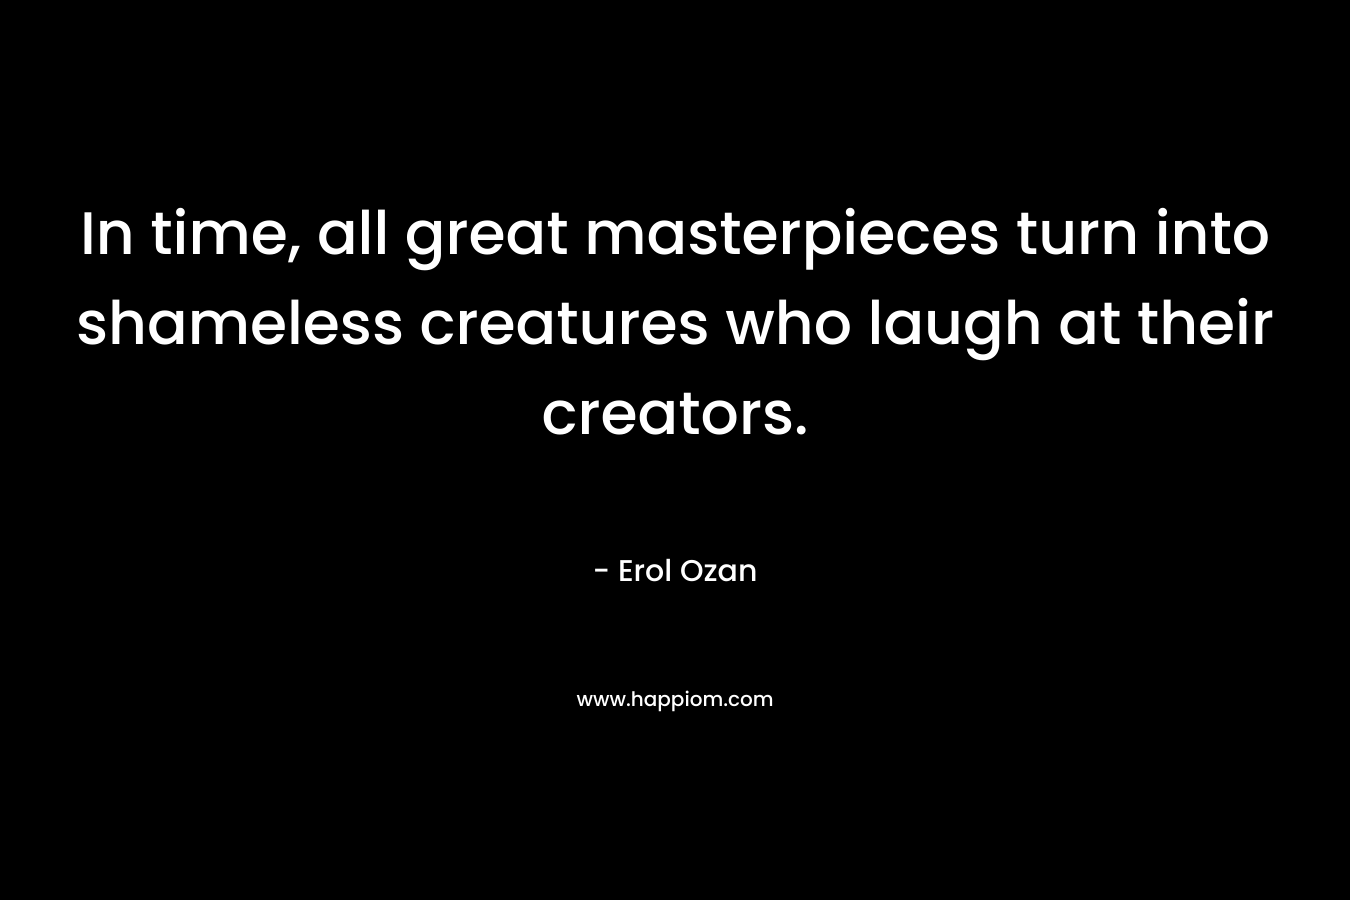 In time, all great masterpieces turn into shameless creatures who laugh at their creators.